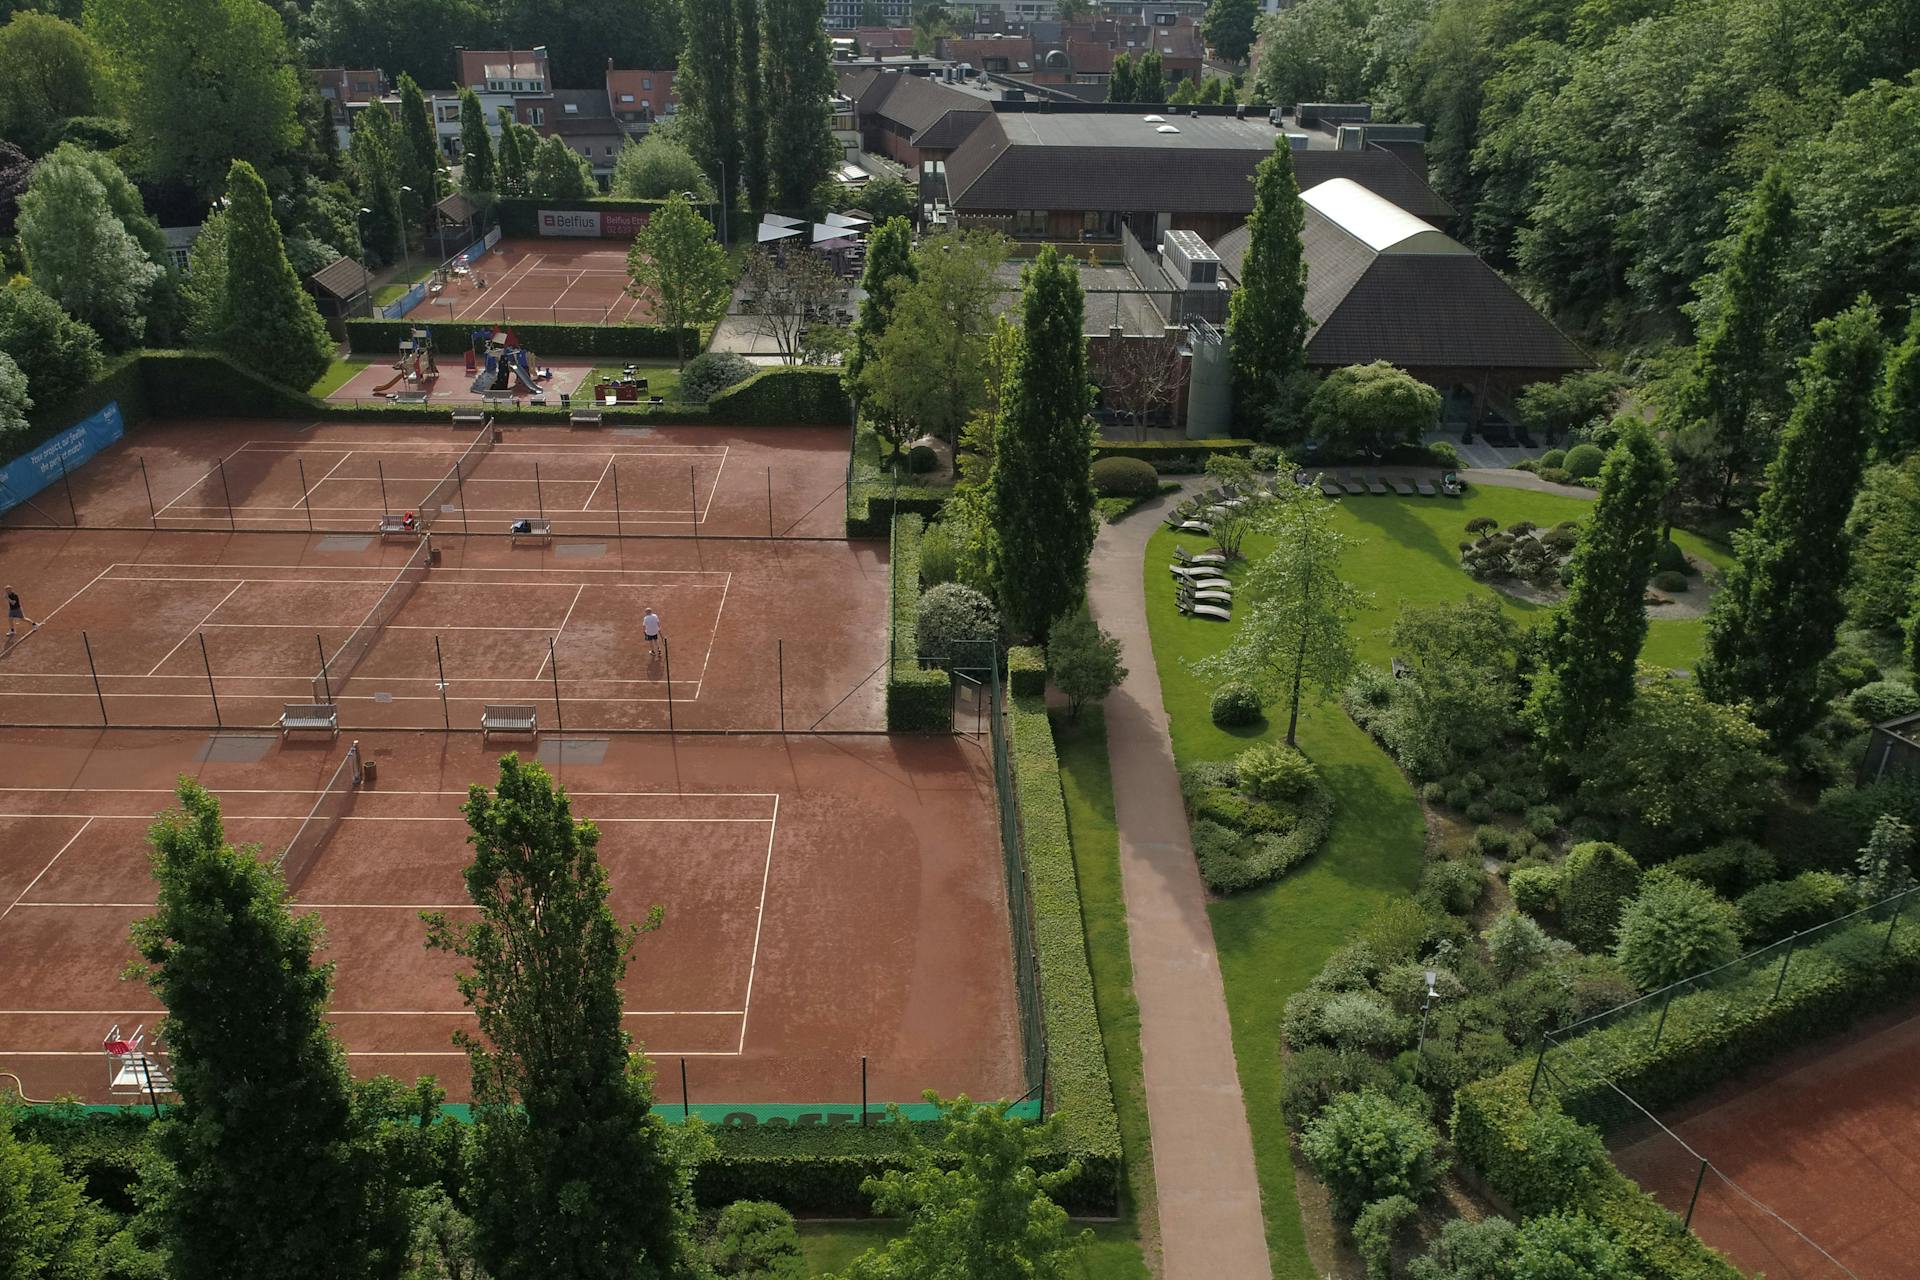 A country club in the heart of the city